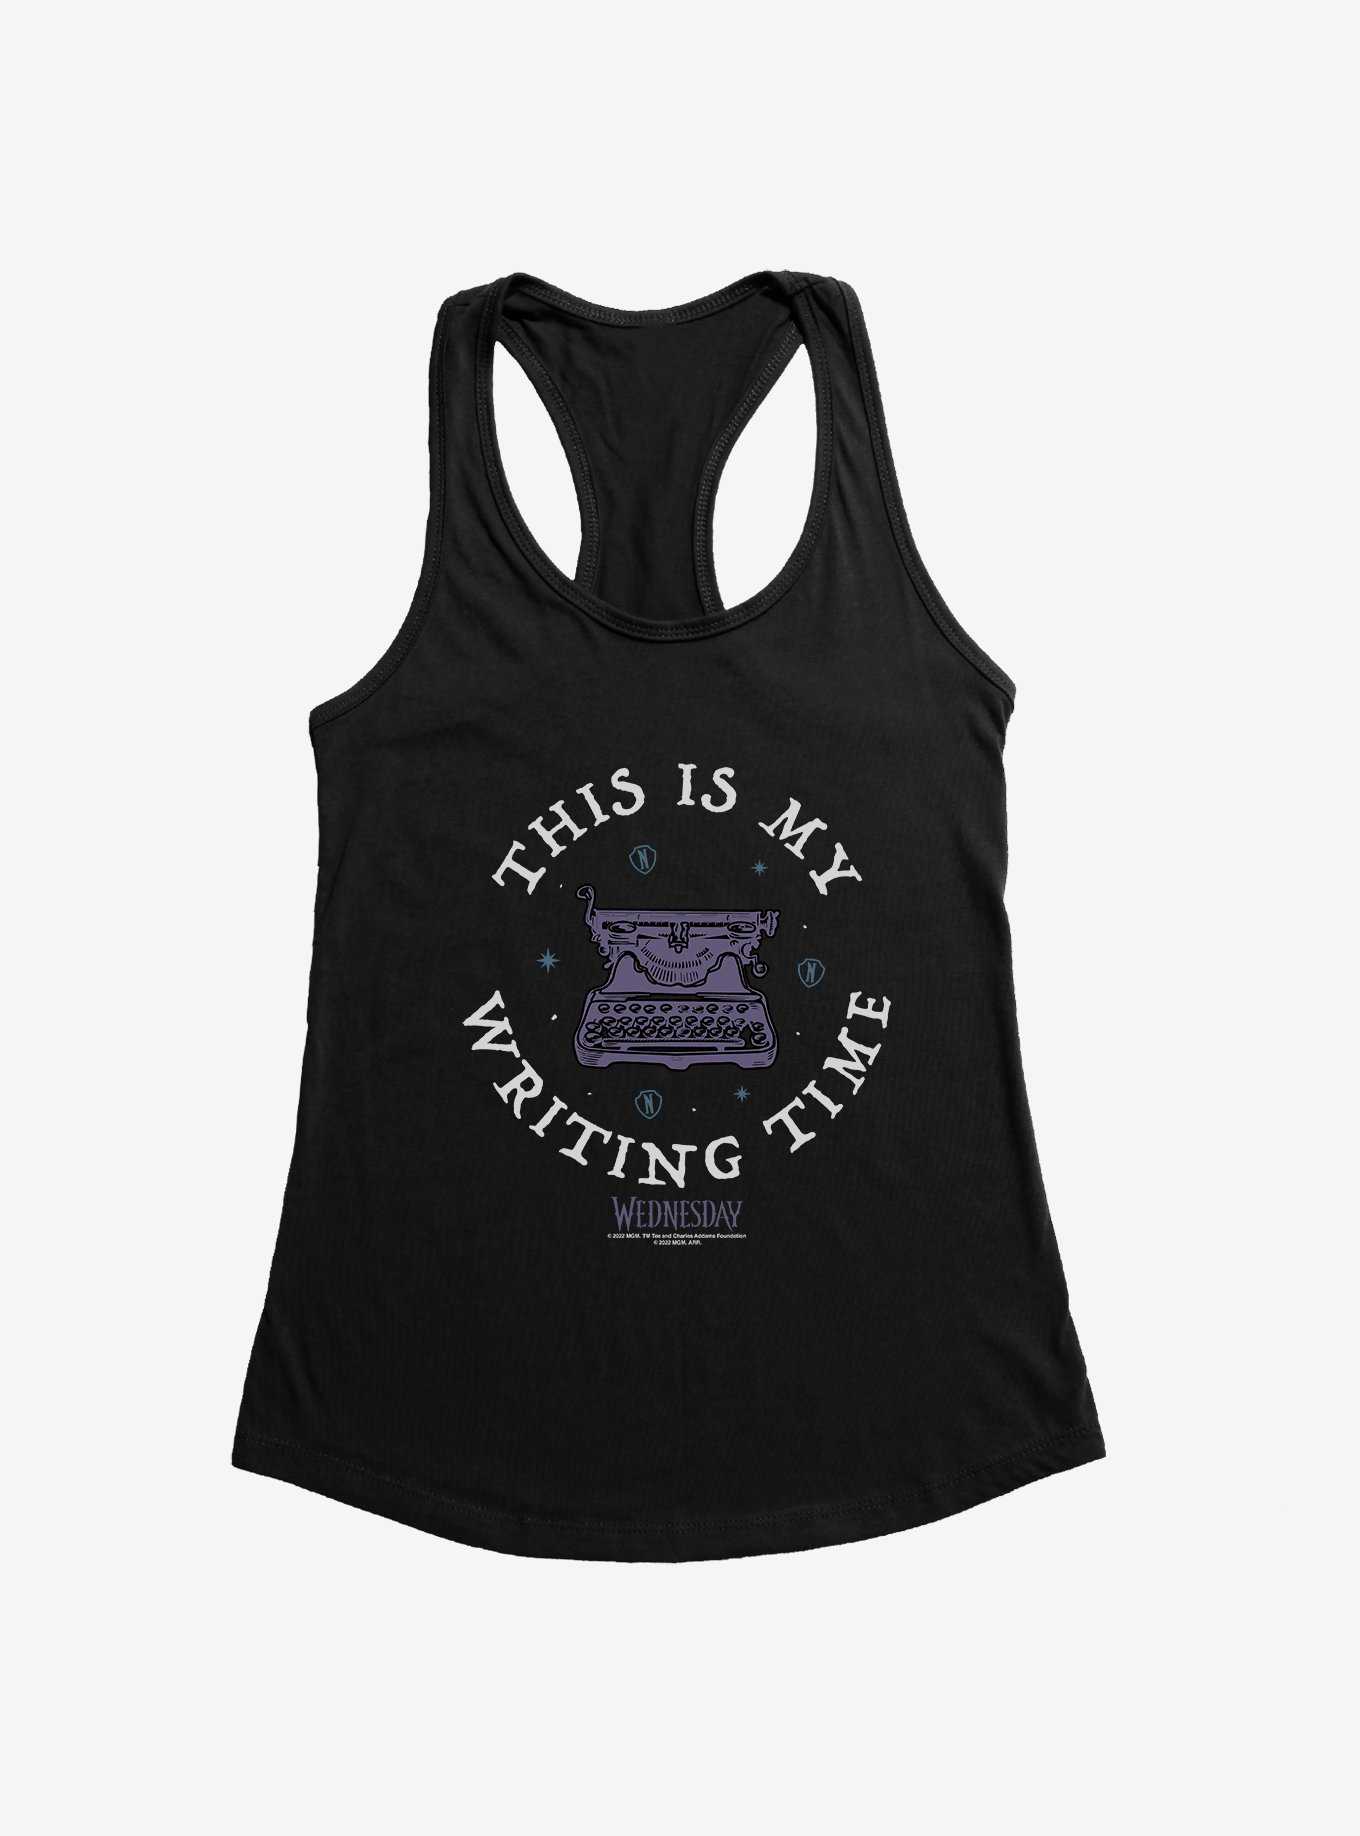 Wednesday This Is My Writing Time Girls Tank, , hi-res